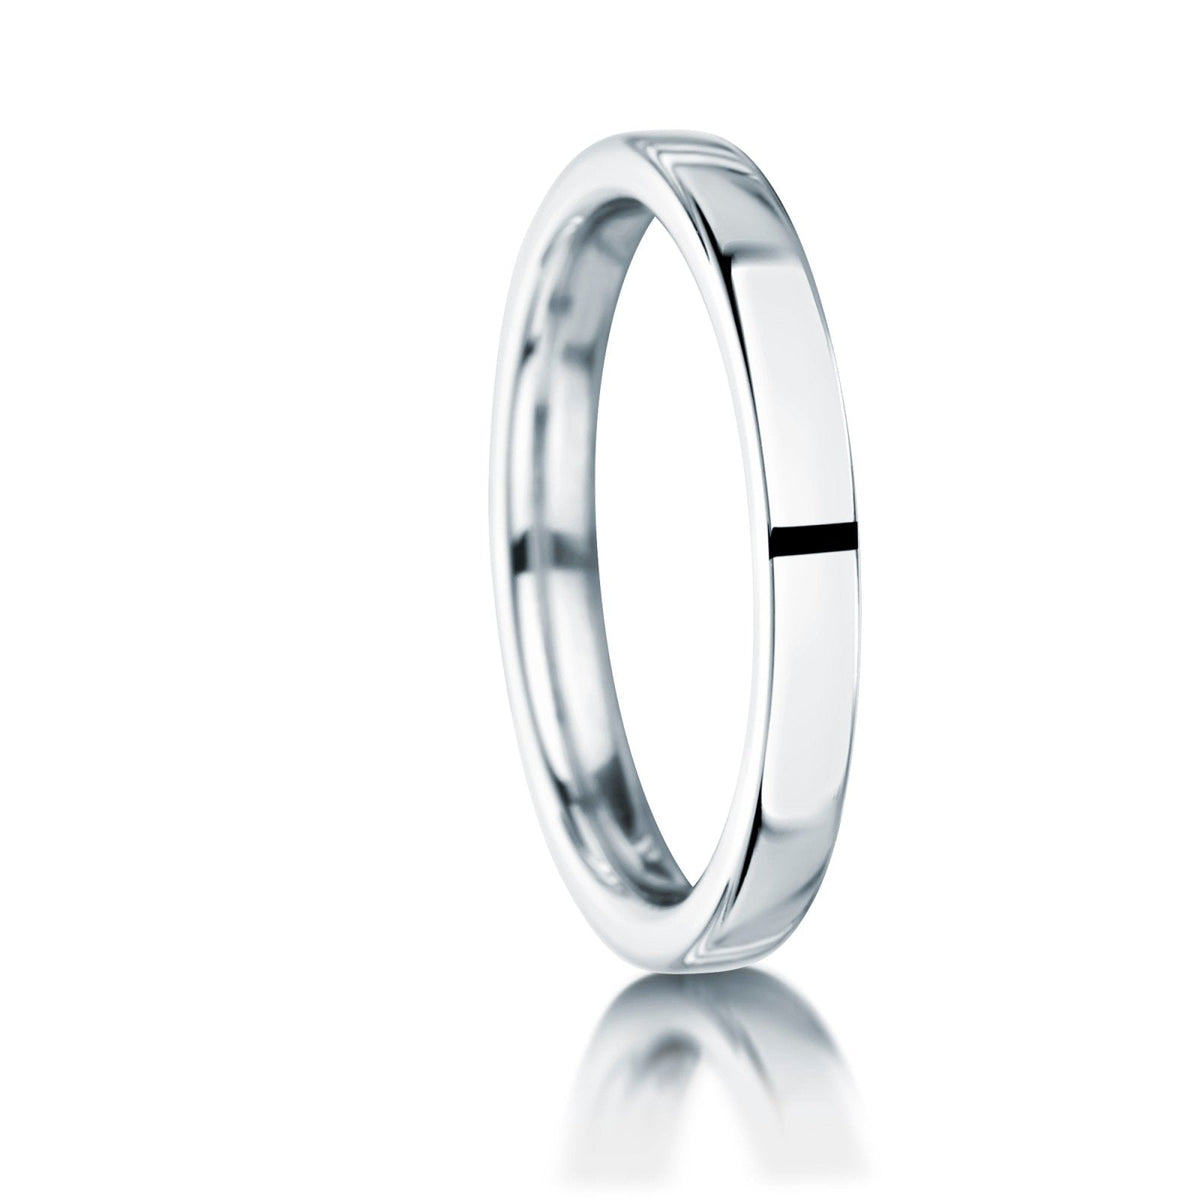 Straight on view of 18ct White gold plain 2.5mm wide wedding ring on a white background.